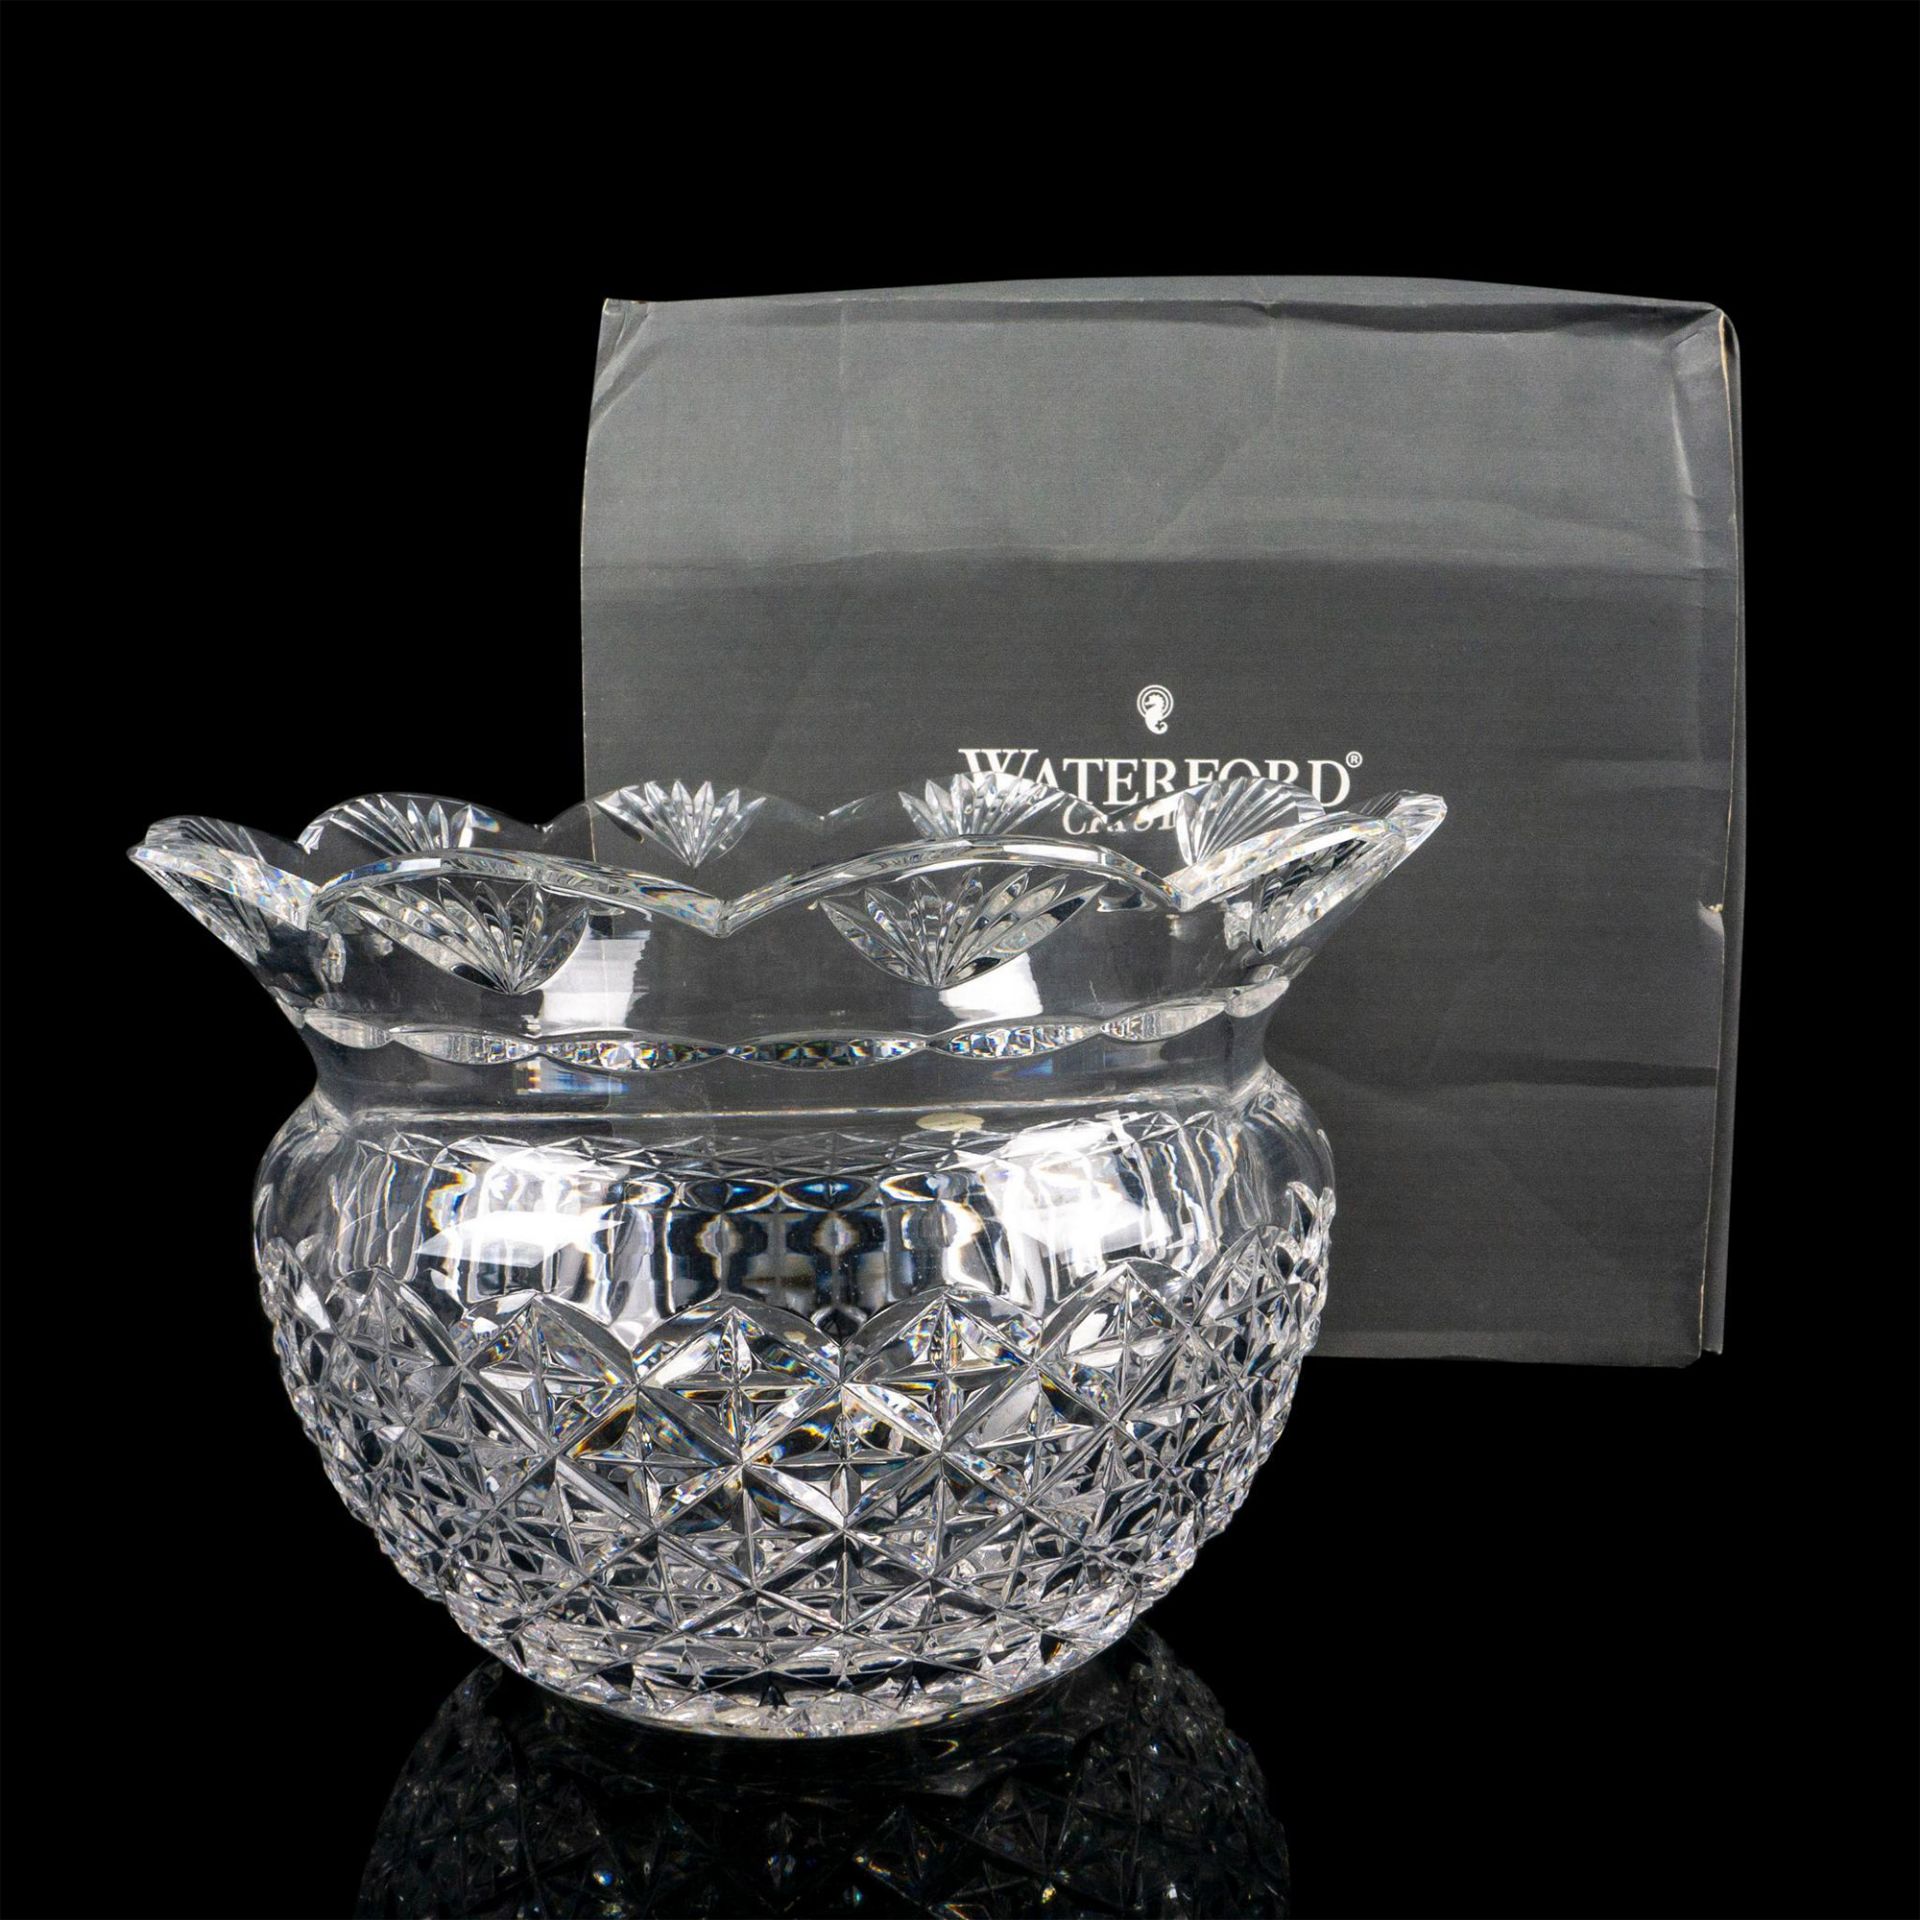 Waterford Crystal Hospitality Bowl - Image 4 of 4